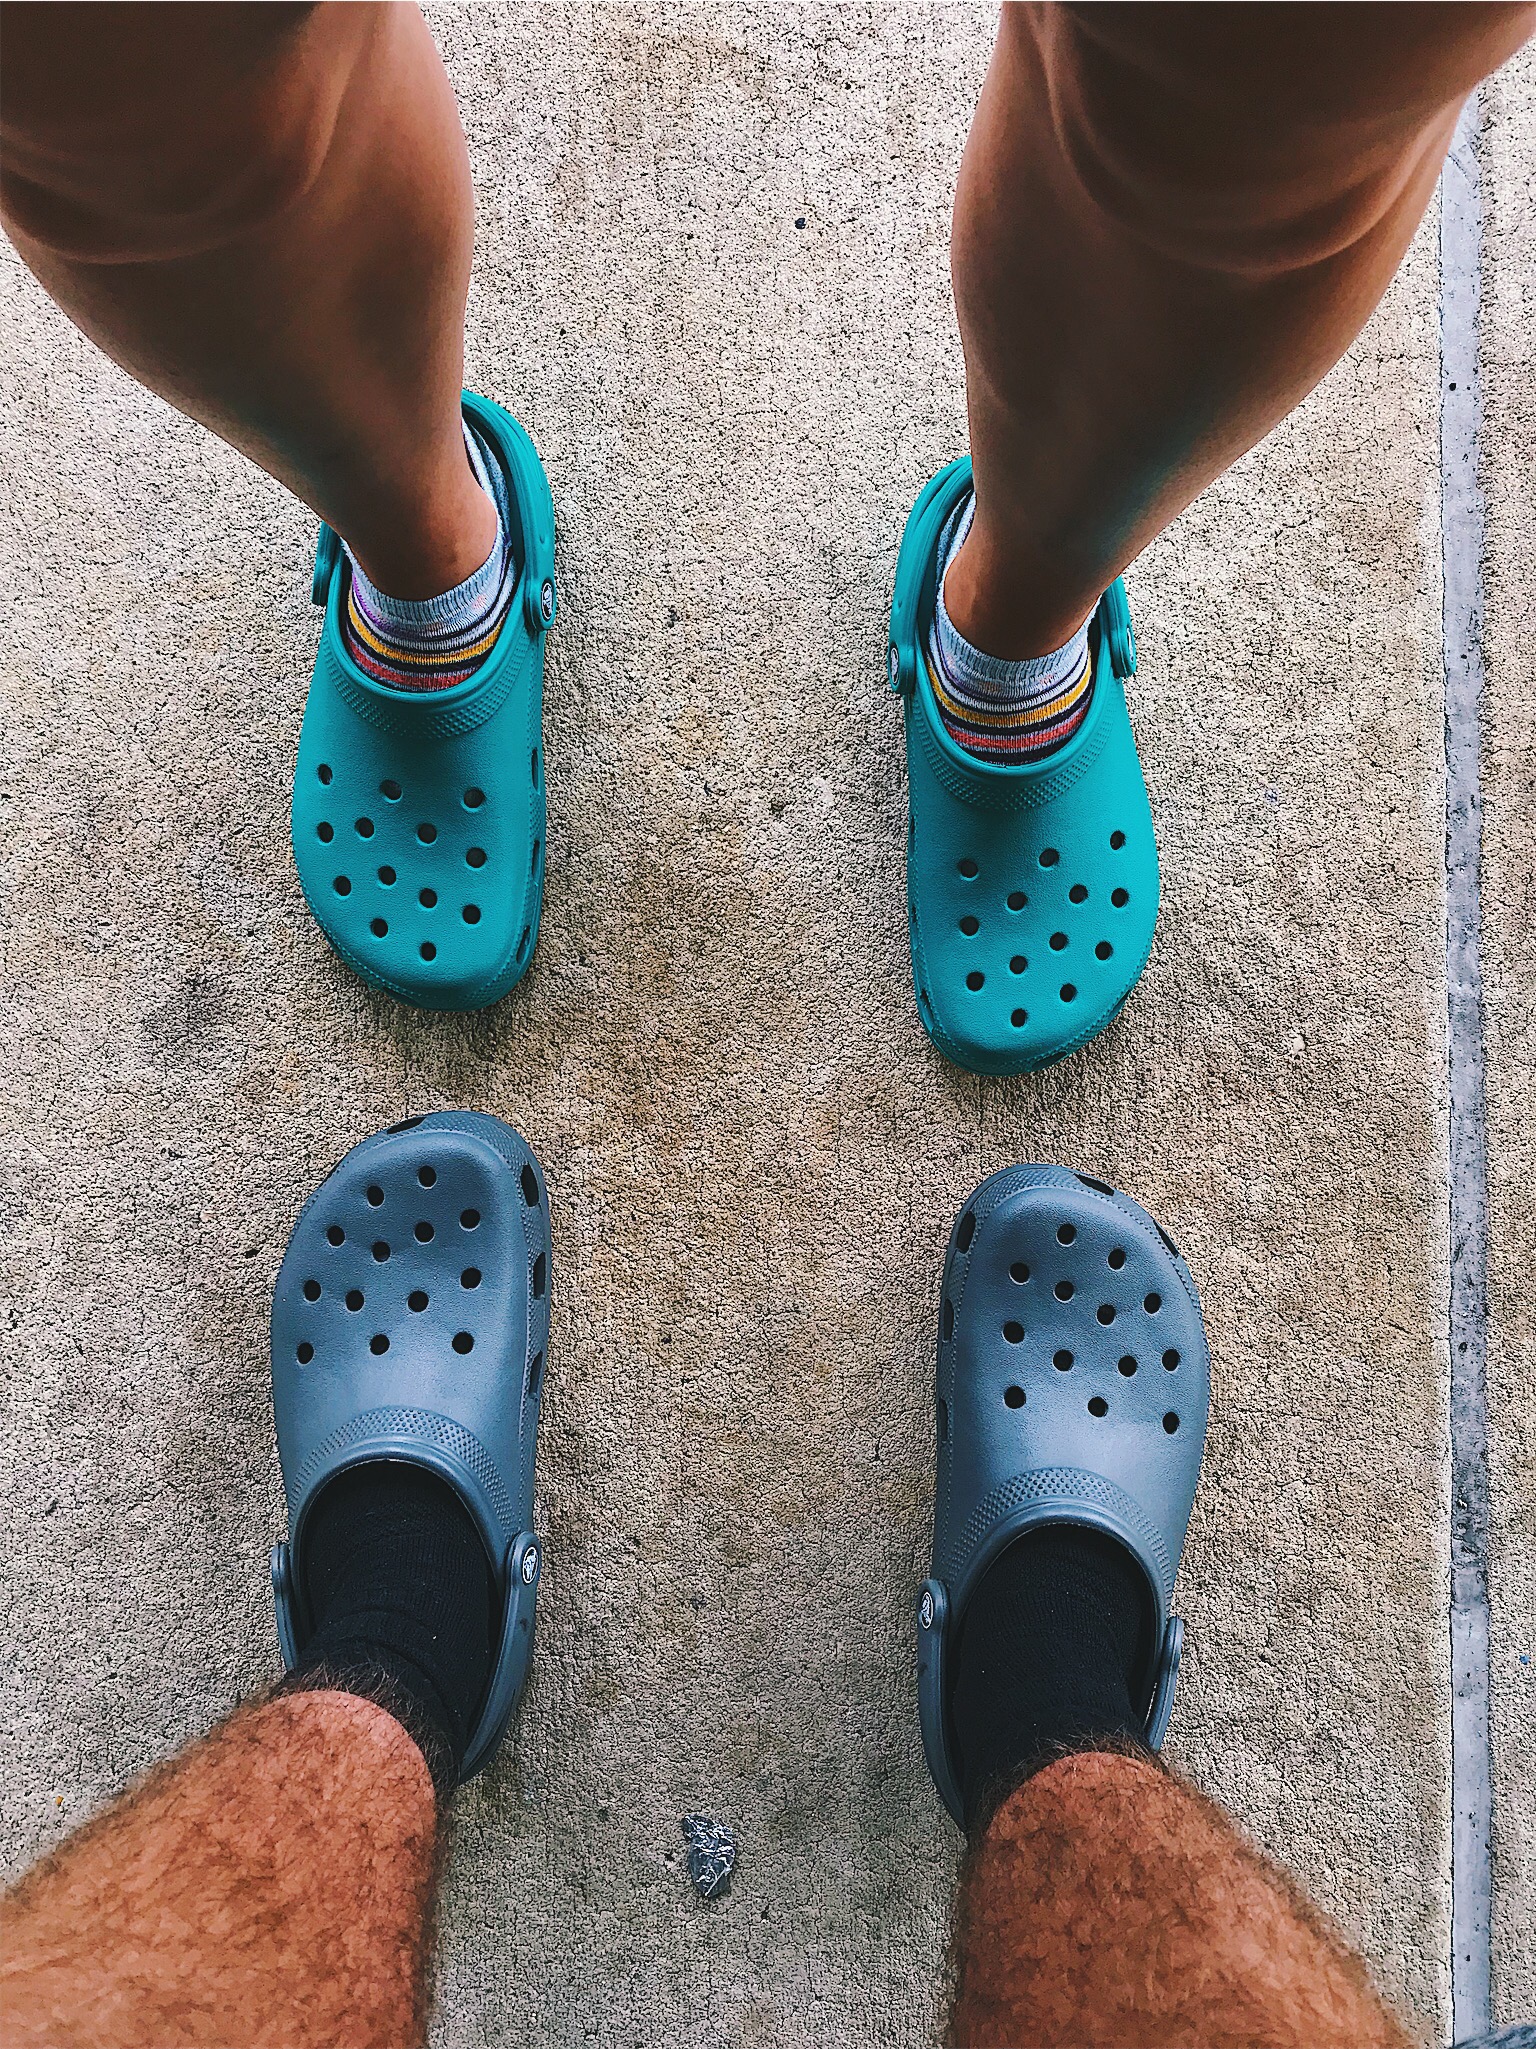 crocs for couples